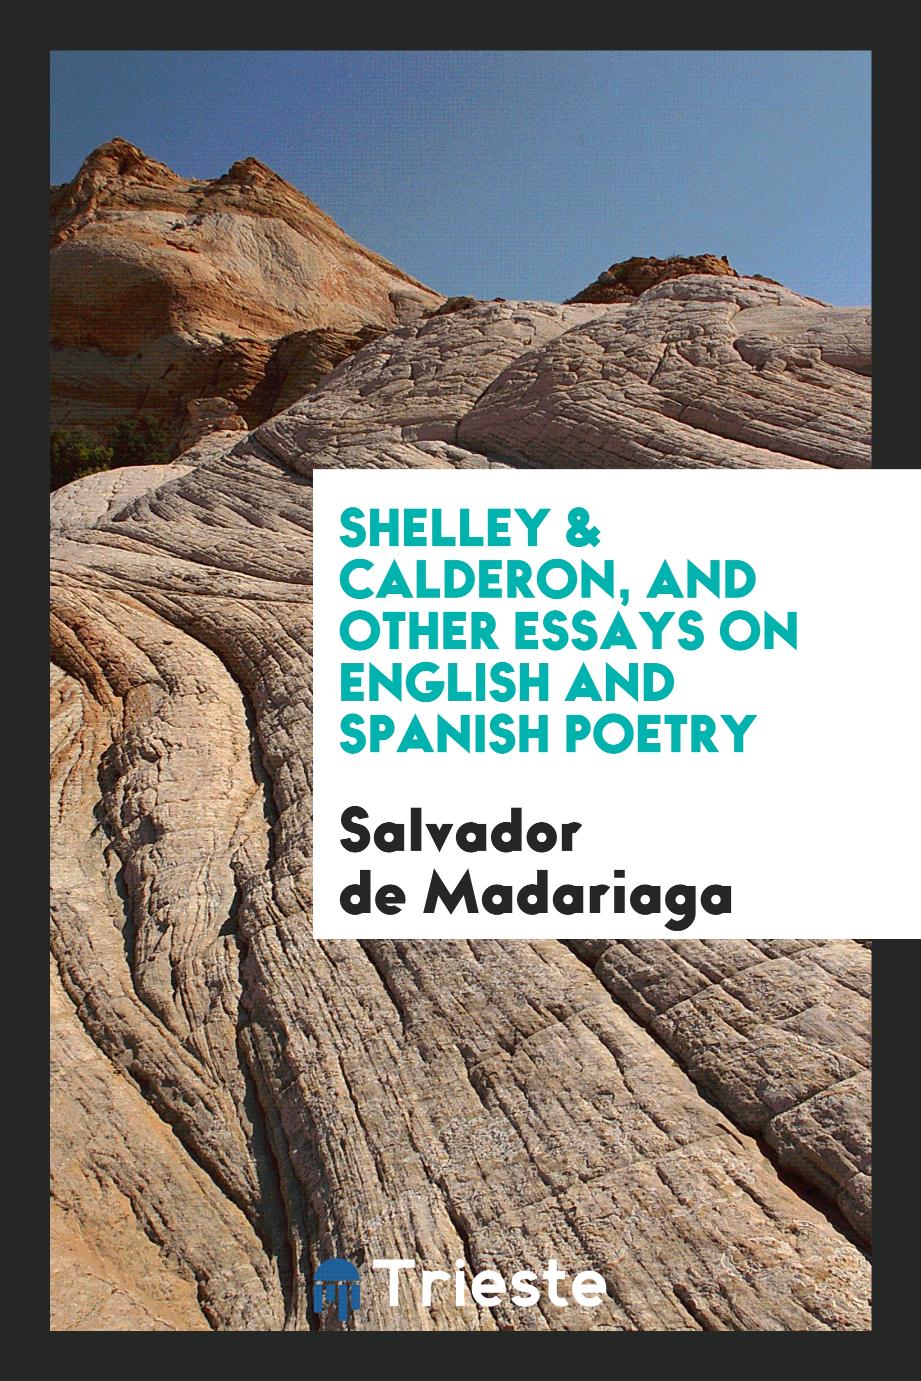 Shelley & Calderon, and other essays on English and Spanish poetry